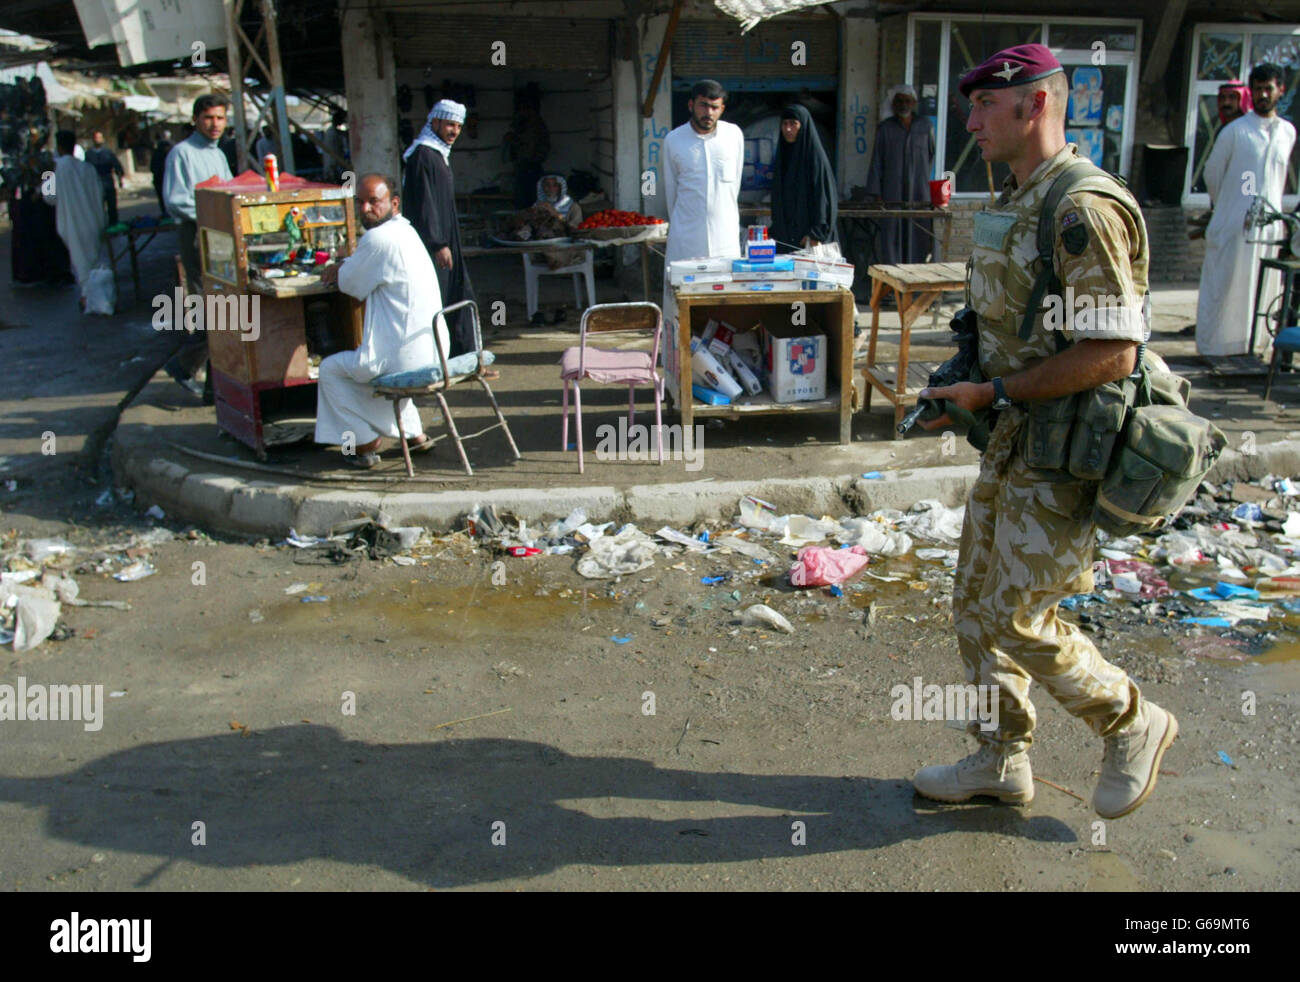 A soldier from C company of the 1st Battalion The Parachute Regiment casts a long shadow as he passes traders in the market of Al Qurna, Iraq. He and colleagues from seven platoon patroled on foot near the biblical Garden of Eden wearing berets and not helmets for the first time. Stock Photo